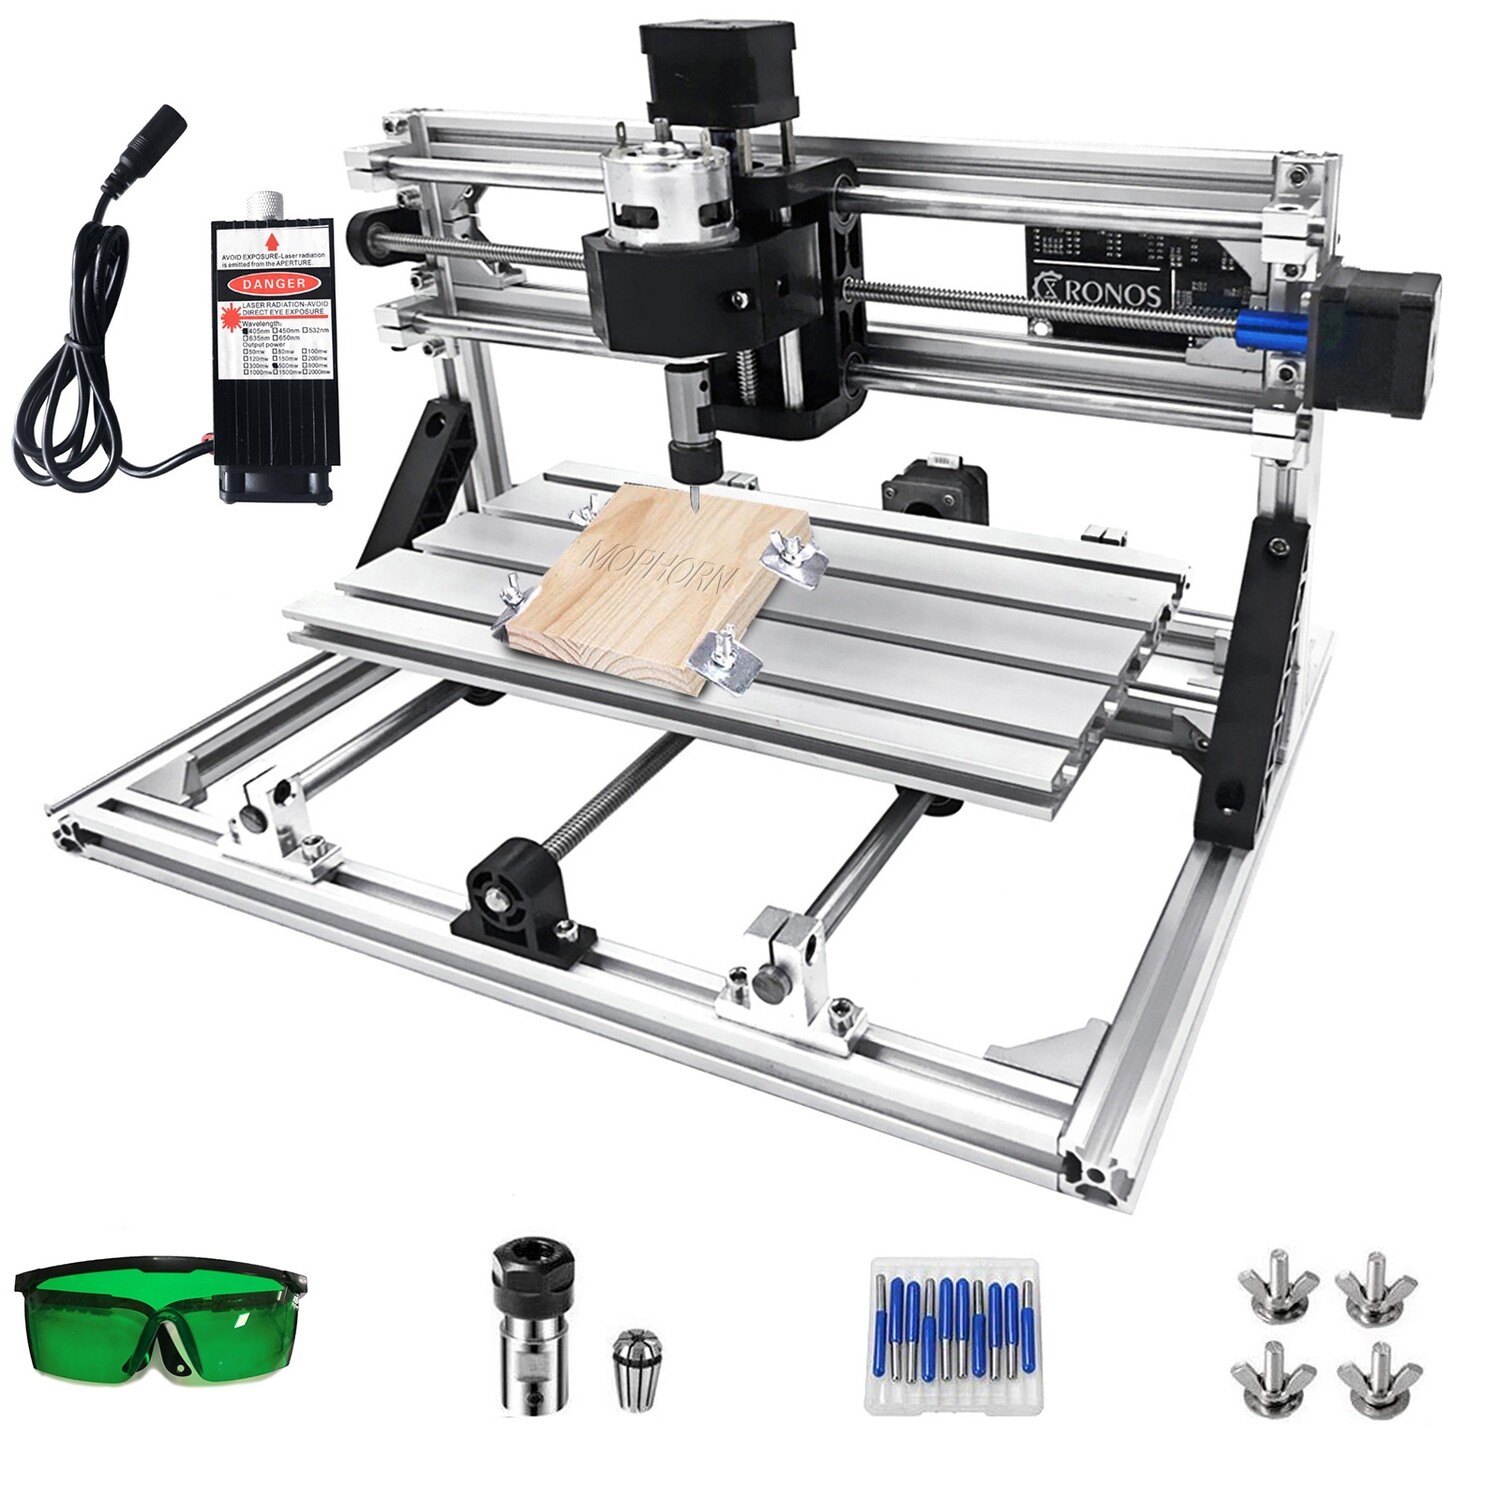 With 500mw Laser Engraver Grbl Injection and CNC 3018 Router Kit